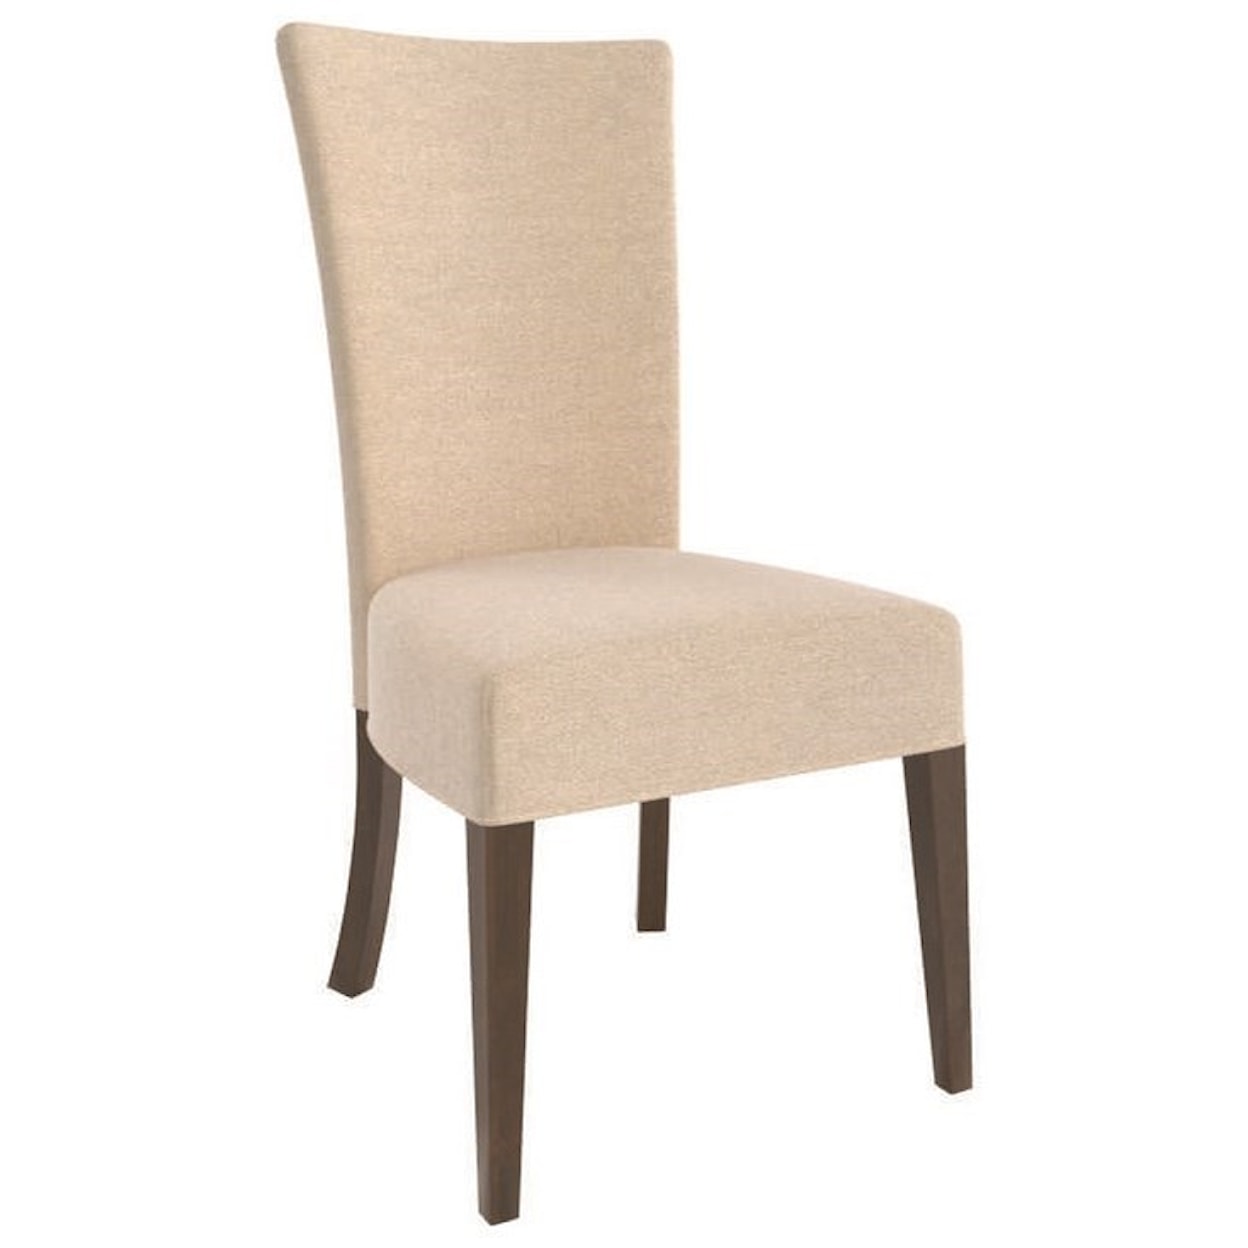 Canadel Contemporary Customizable Upholstered Side Chair